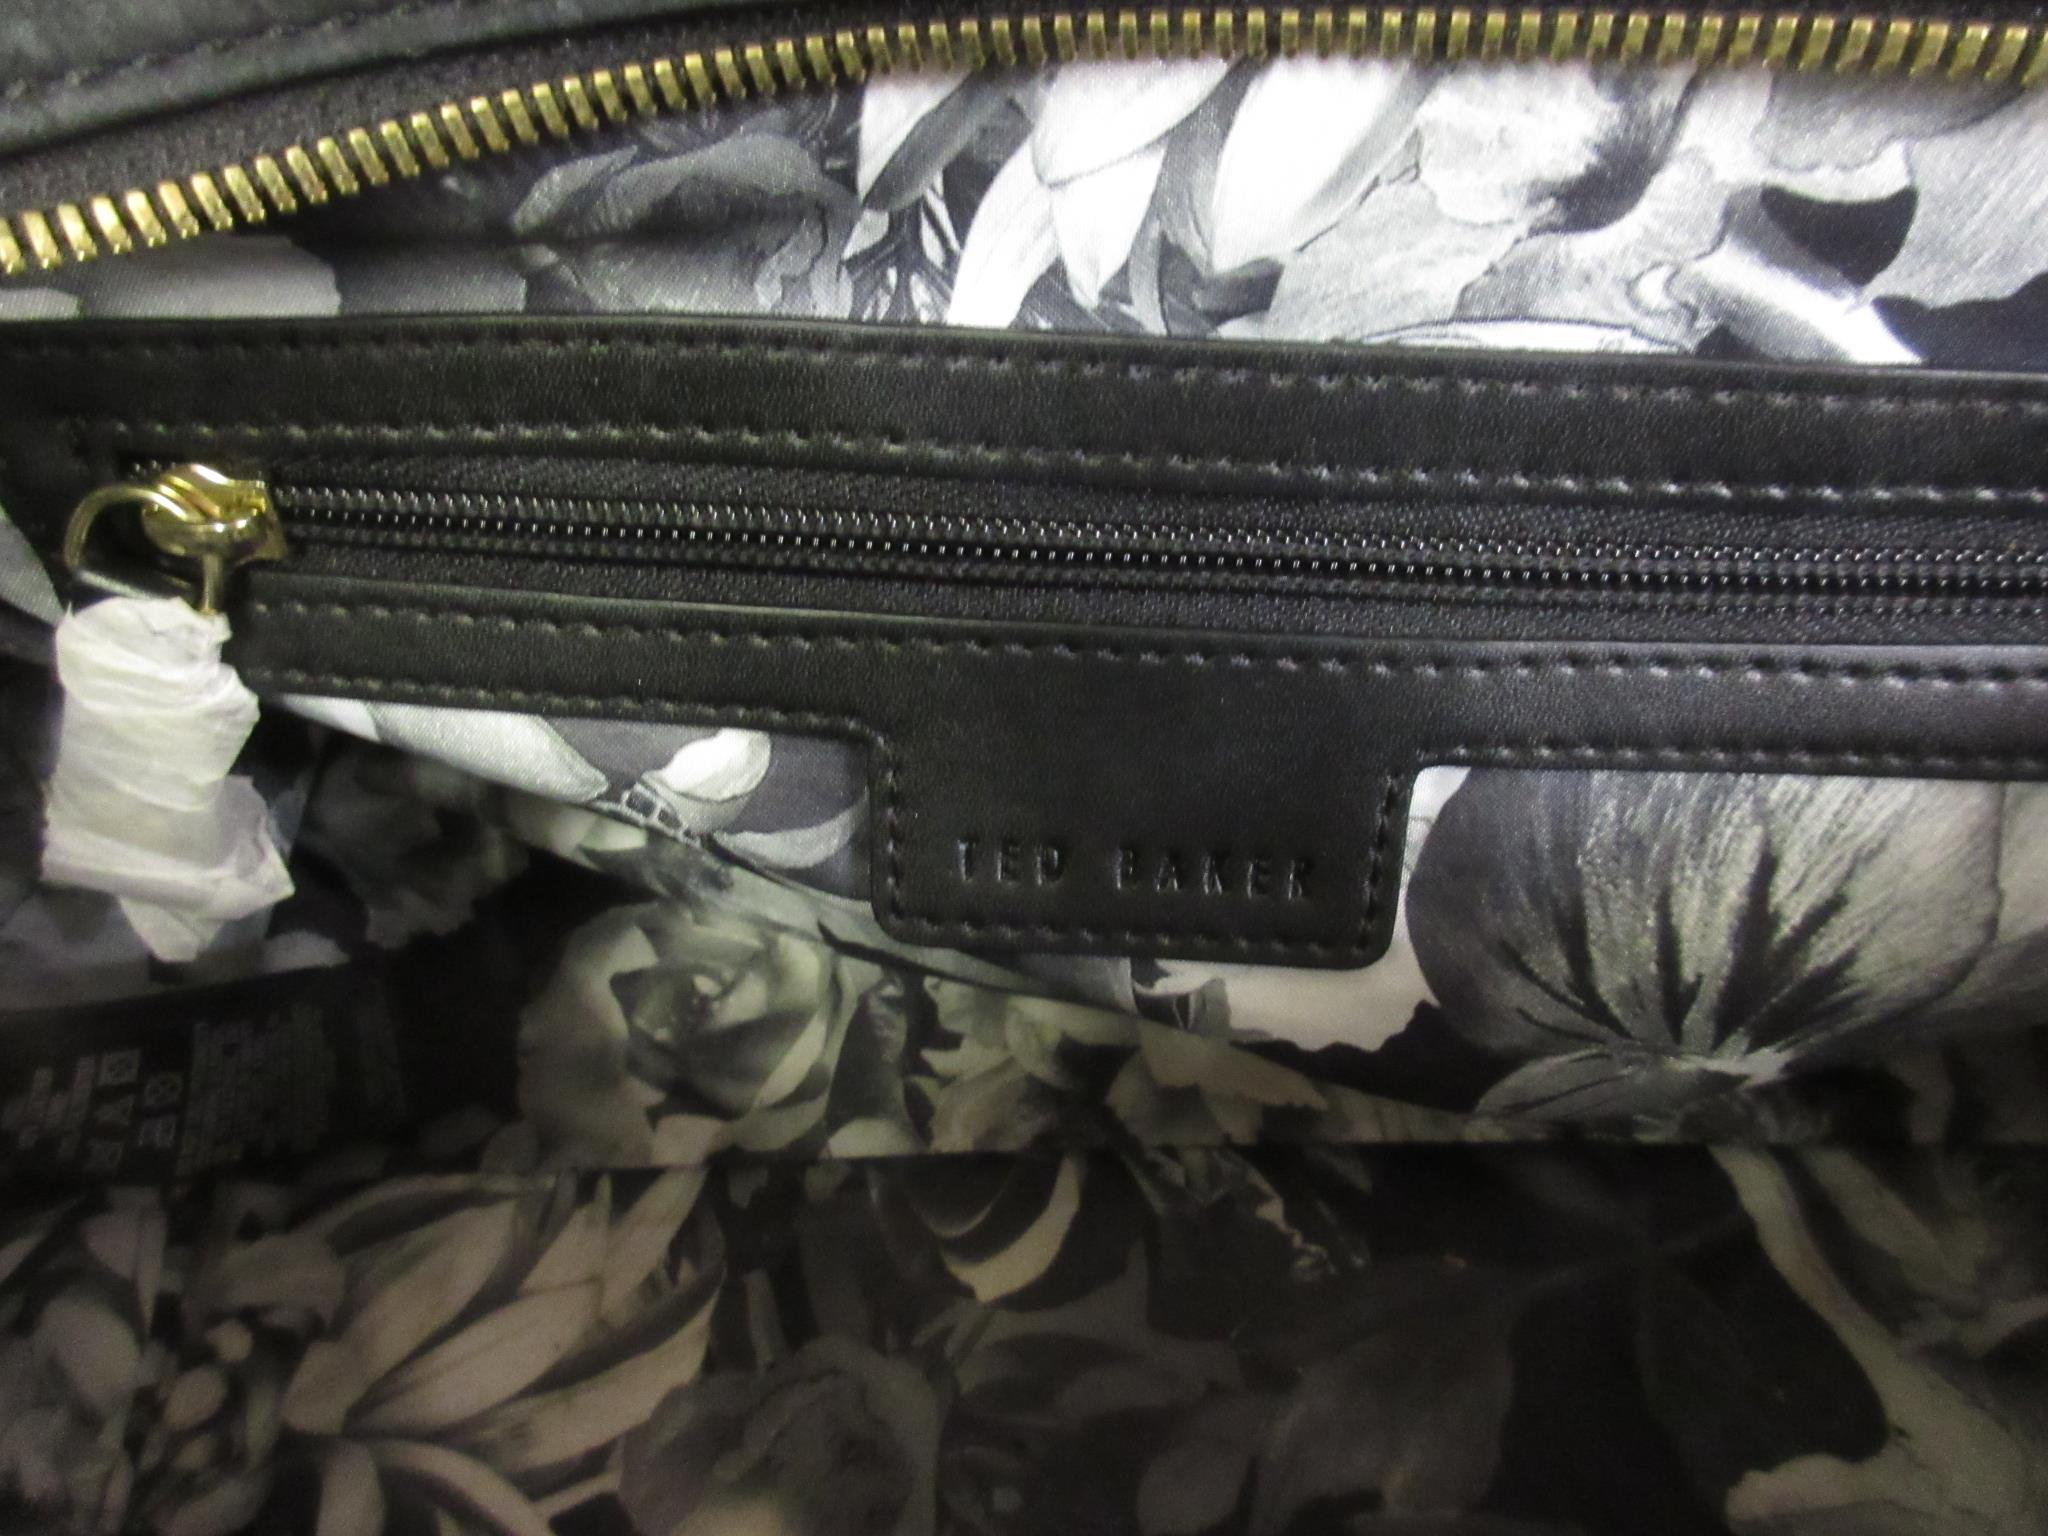 Ted Baker, gilt brass mounted black leather handbag, with dust bag This bag has been used but is - Image 4 of 6